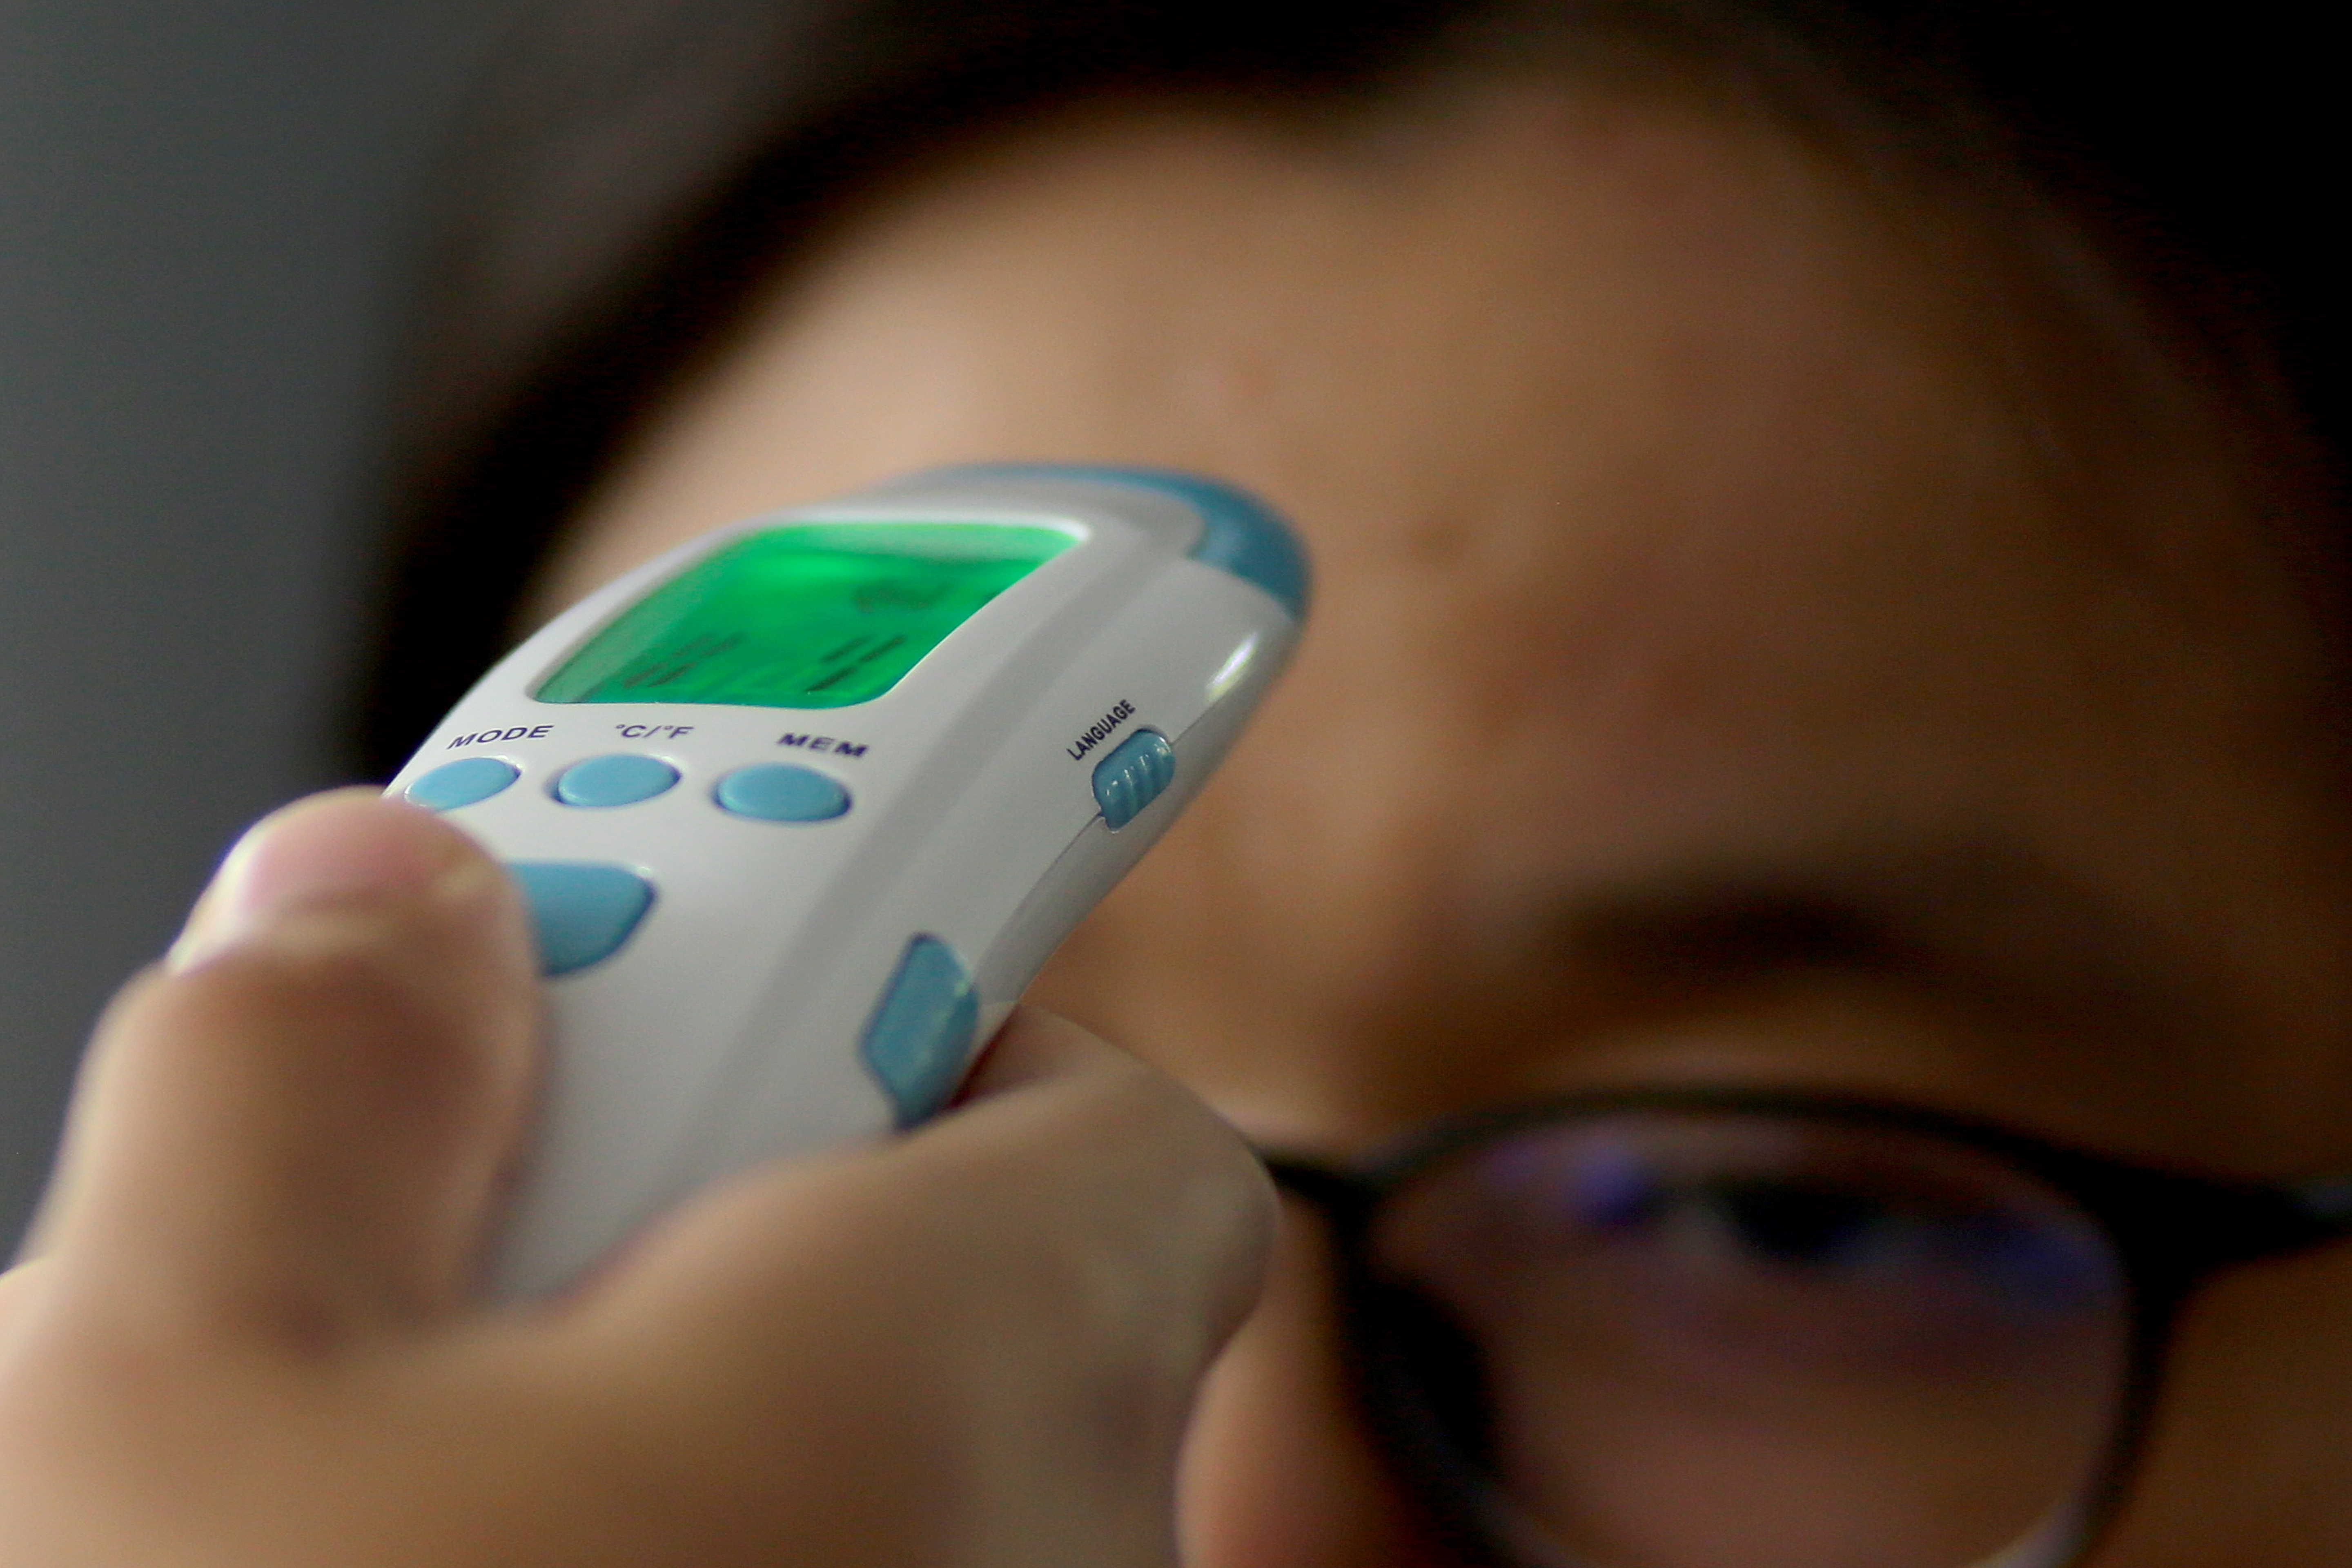 A woman wearing glasses getting her temperature taken.